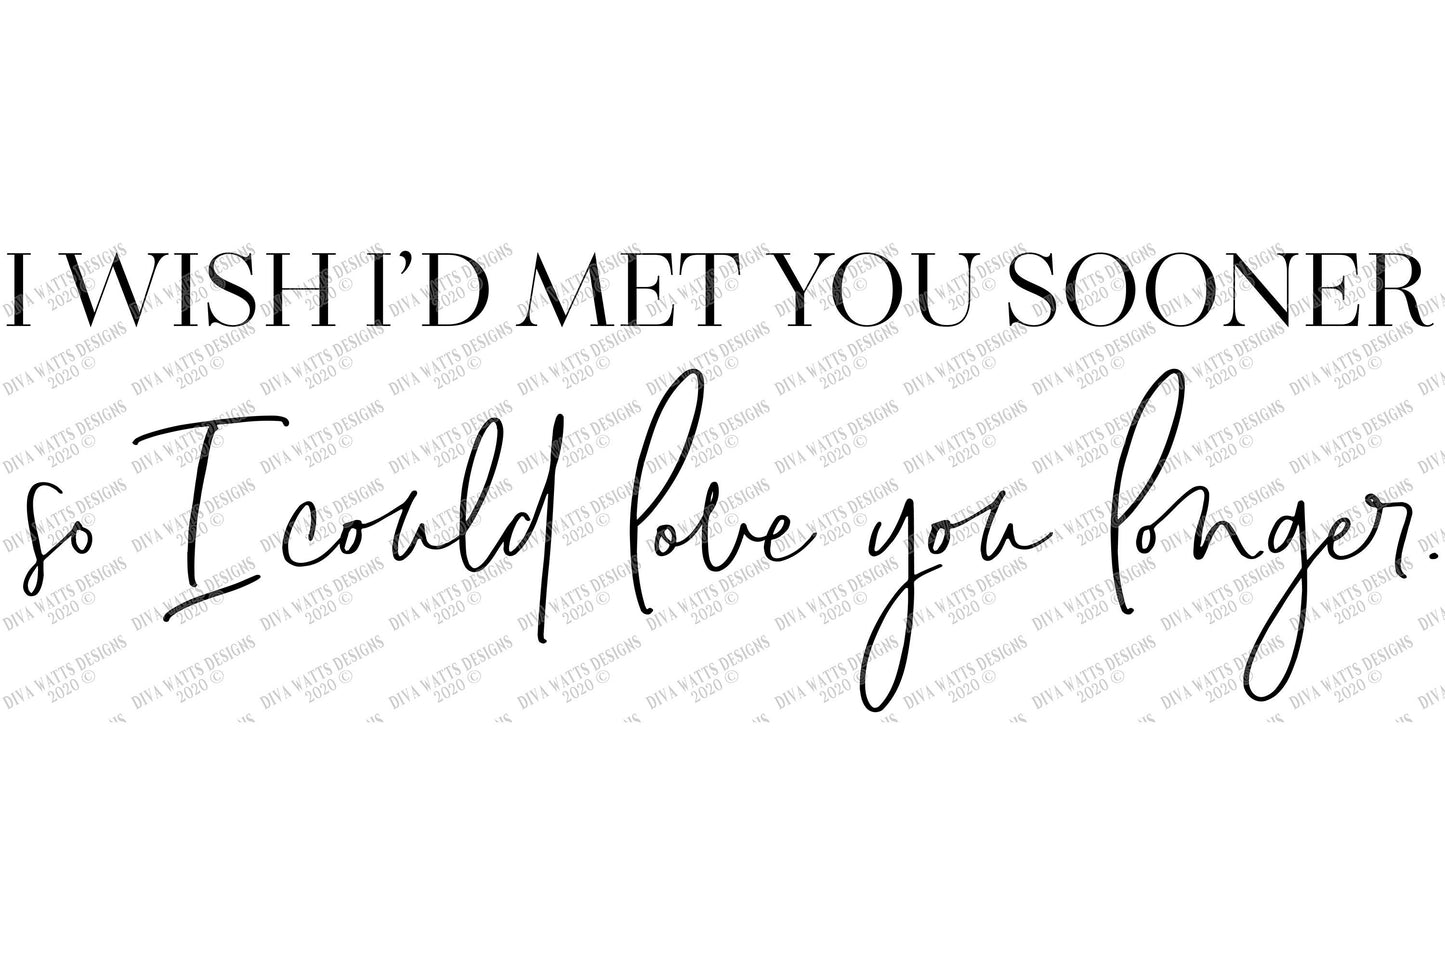 SVG | I Wish I'd Met You Sooner So I Could Love You Longer | Cutting File | Wedding Anniversary Engagement | Farmhouse Sign | Vinyl Stencil